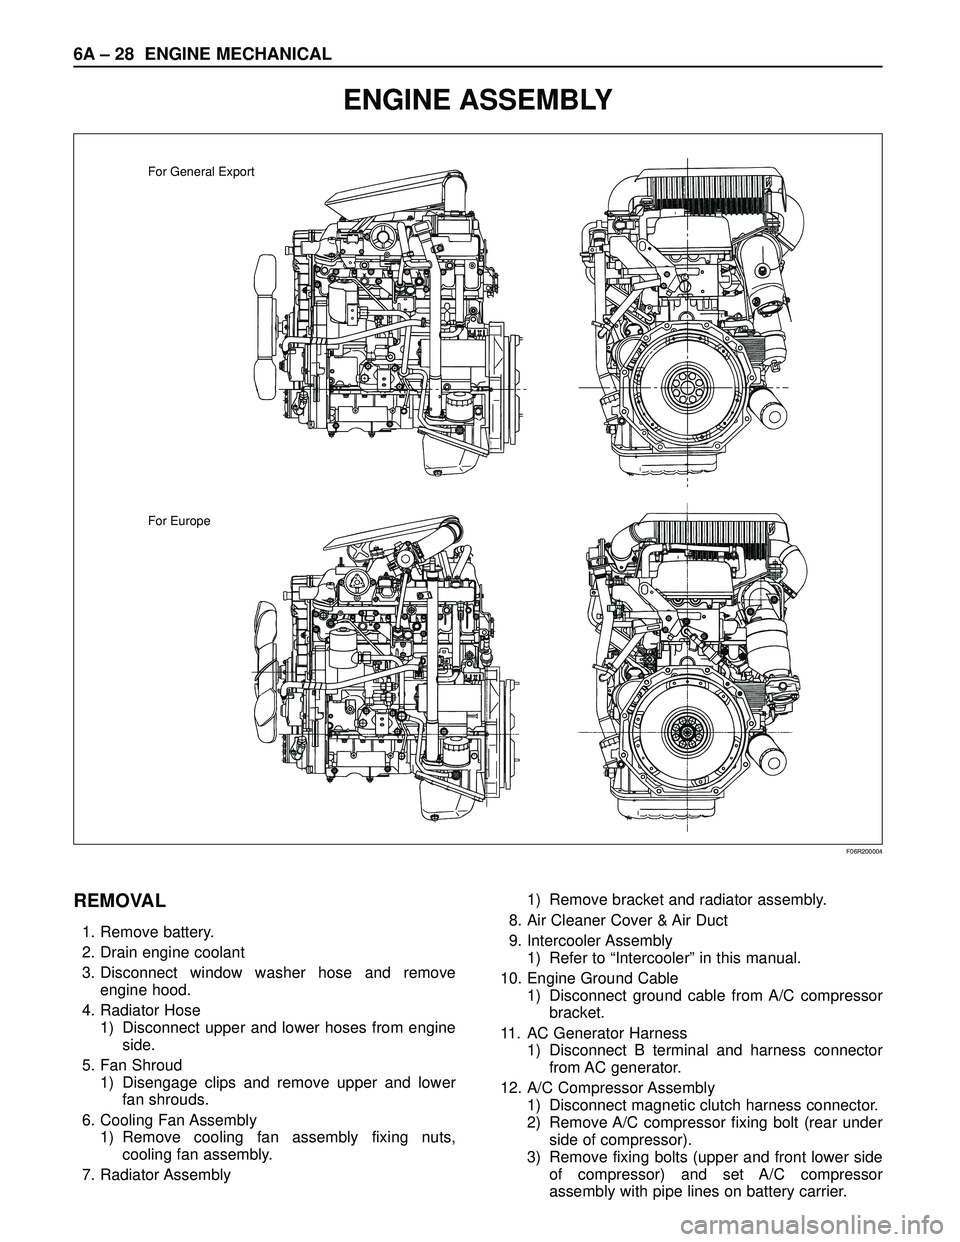 ISUZU TROOPER 1998  Service Repair Manual 6A – 28 ENGINE MECHANICAL
ENGINE ASSEMBLY
For General Export
For Europe
F06R200004
REMOVAL
1. Remove battery. 
2. Drain engine coolant
3. Disconnect window washer hose and remove
engine hood.
4. Rad